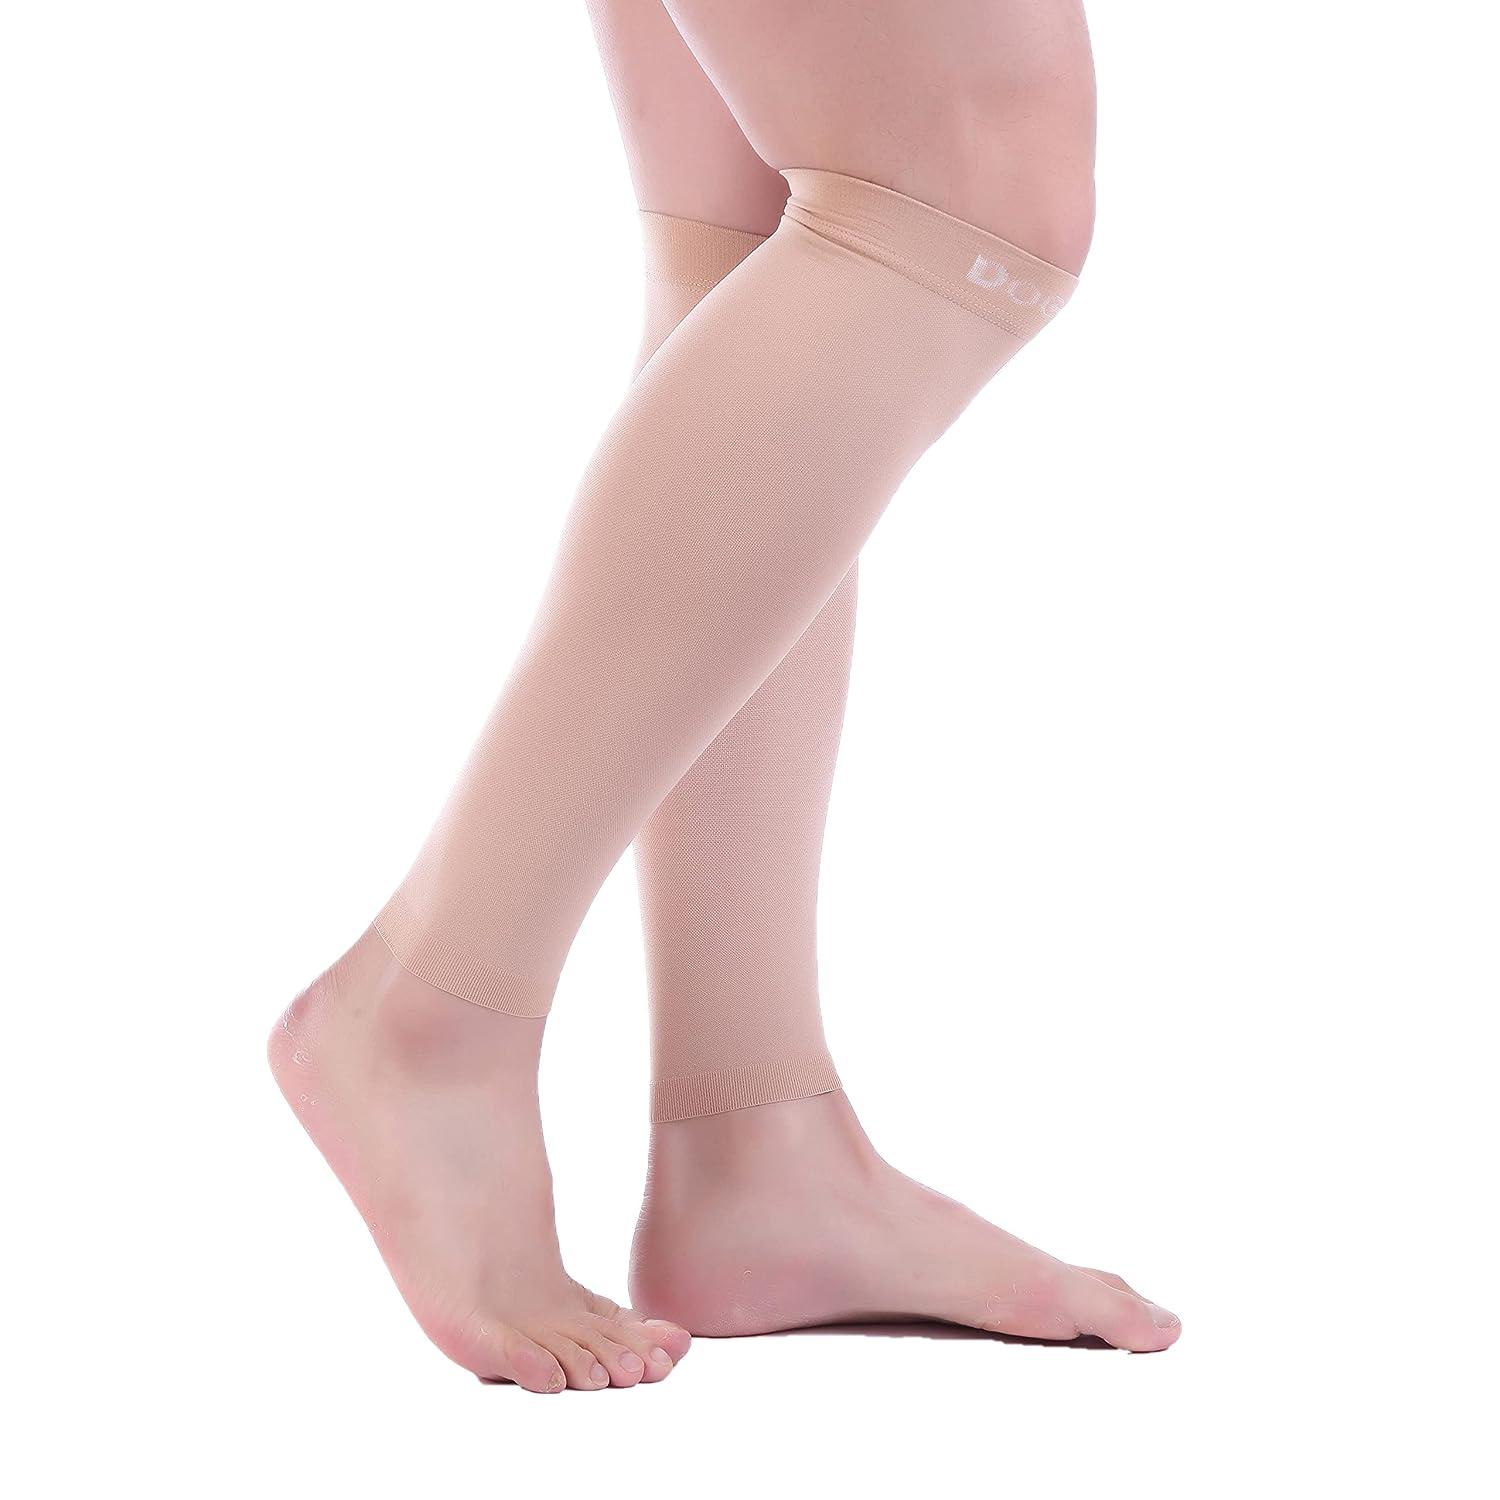 Footless & Plus Size Compression Socks For Women Circulation – Doc